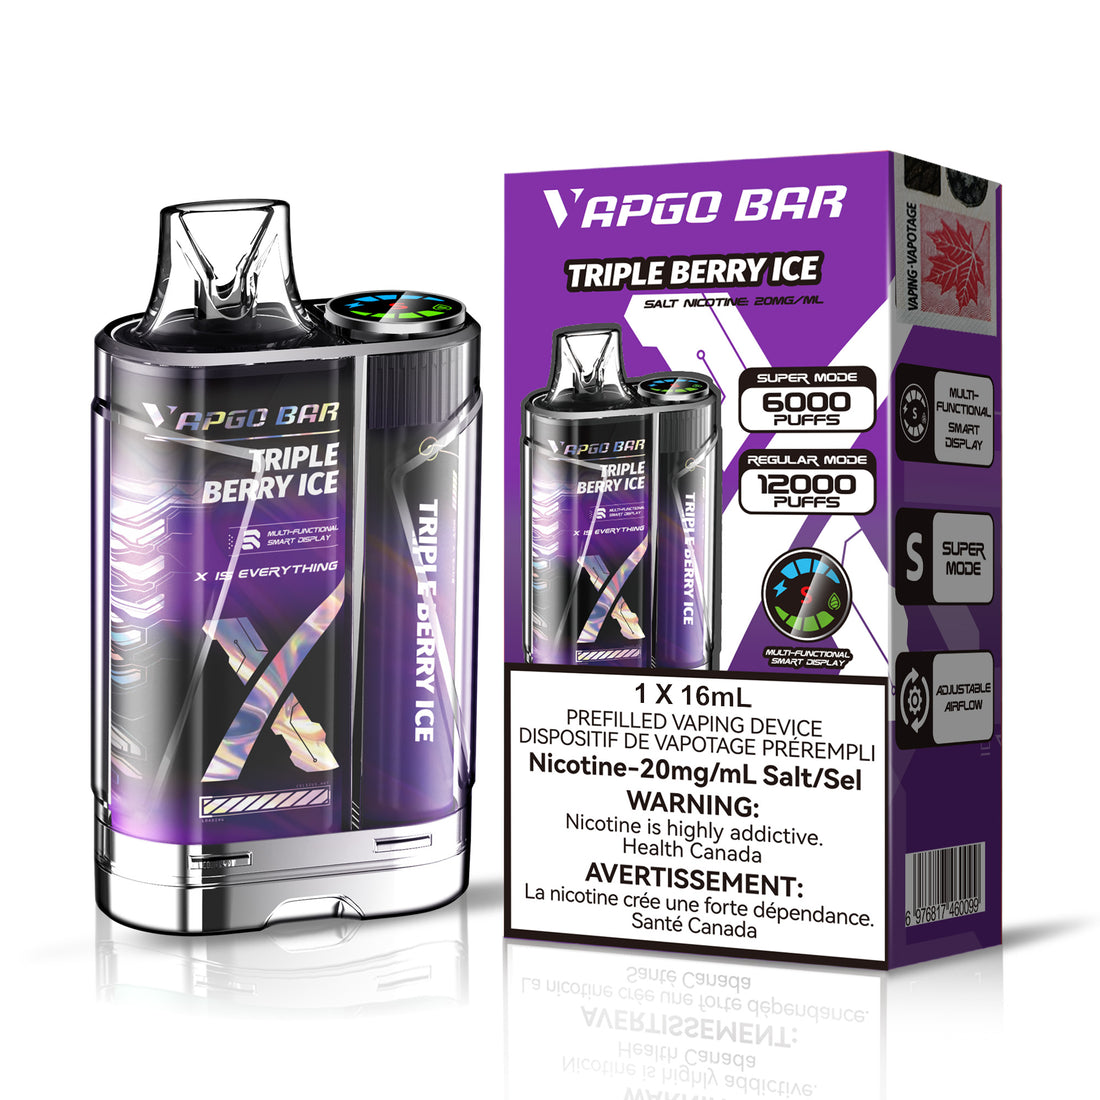 YoOne VapGo - Rechargeable Disposable - 12000 puffs